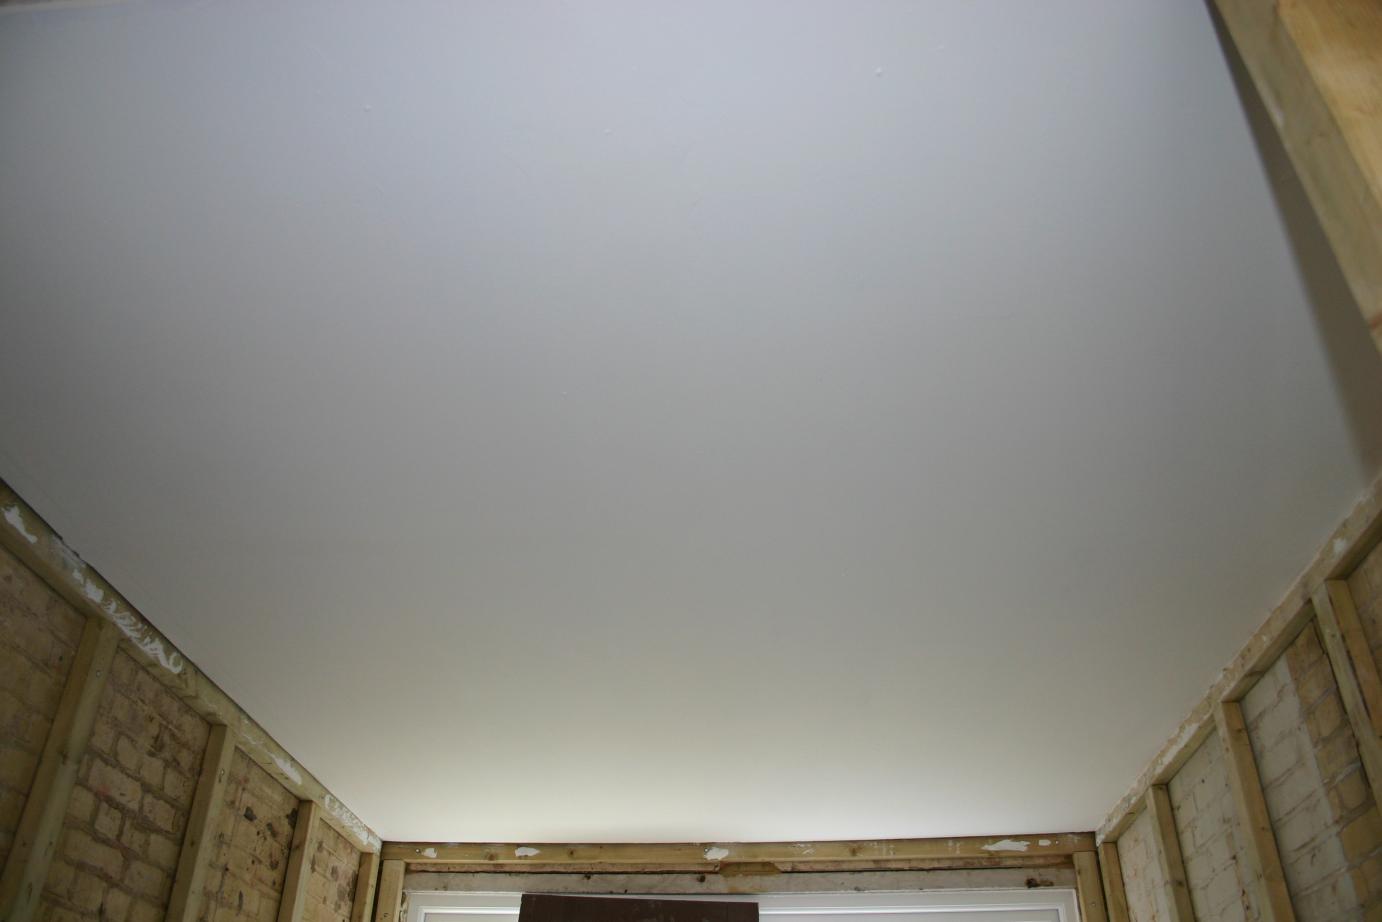 Completed painted ceiling.